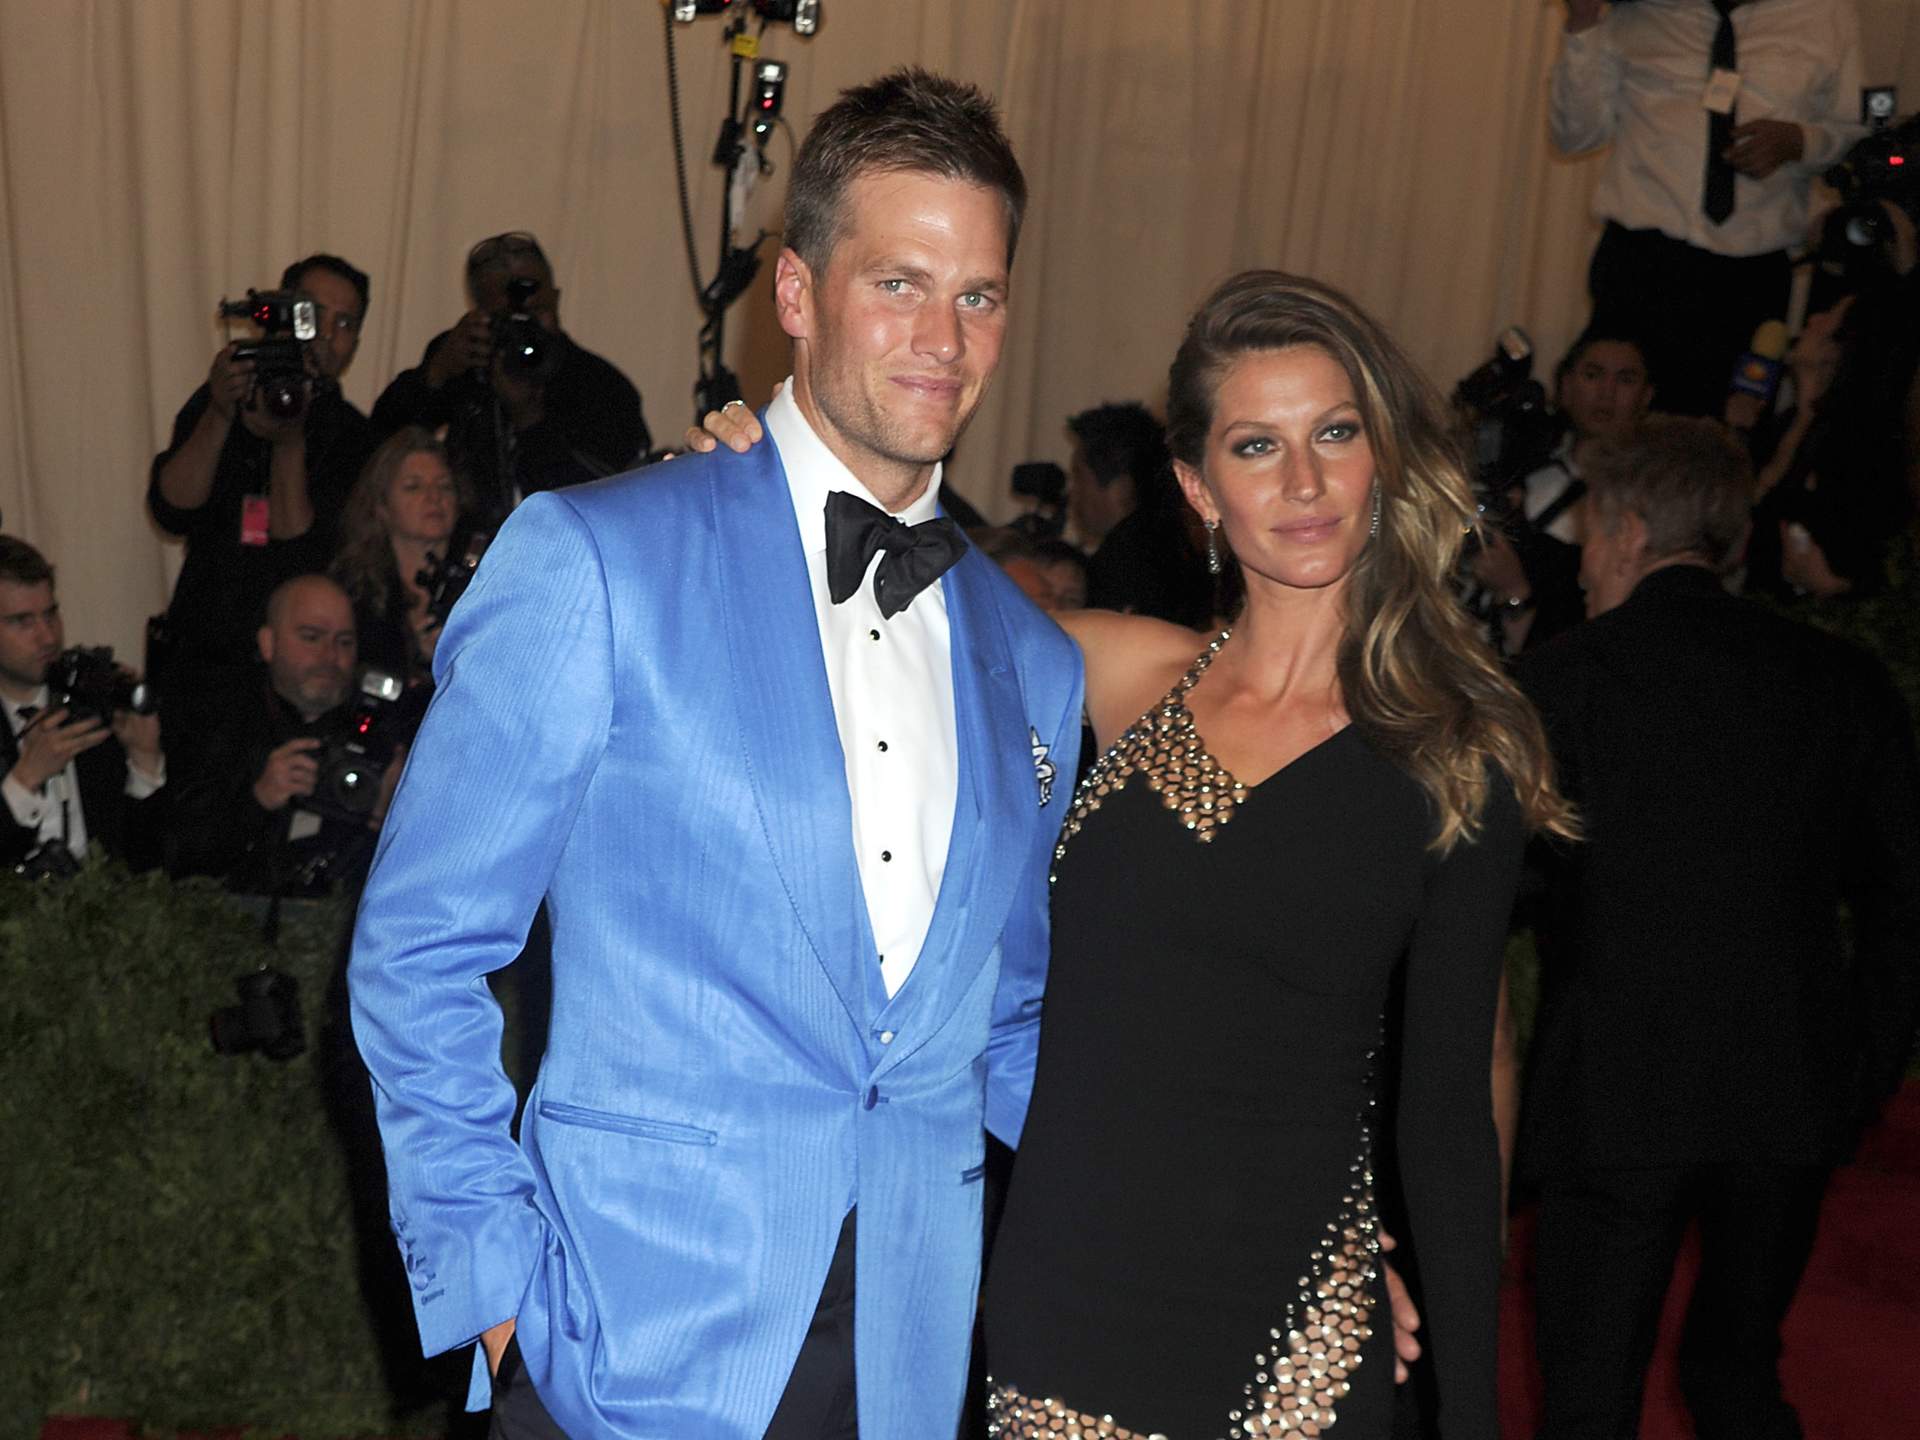 TOM BRADY AND GISELE BUNDCHEN AT THE 'PUNK: CHAOS TO COUTURE' COSTUME INSTITUTE BENEFIT GALA AT THE METROPOLITAN MUSEUM OF ART ON MAY 6

(Foto de ARCHIVO)
08/5/2013